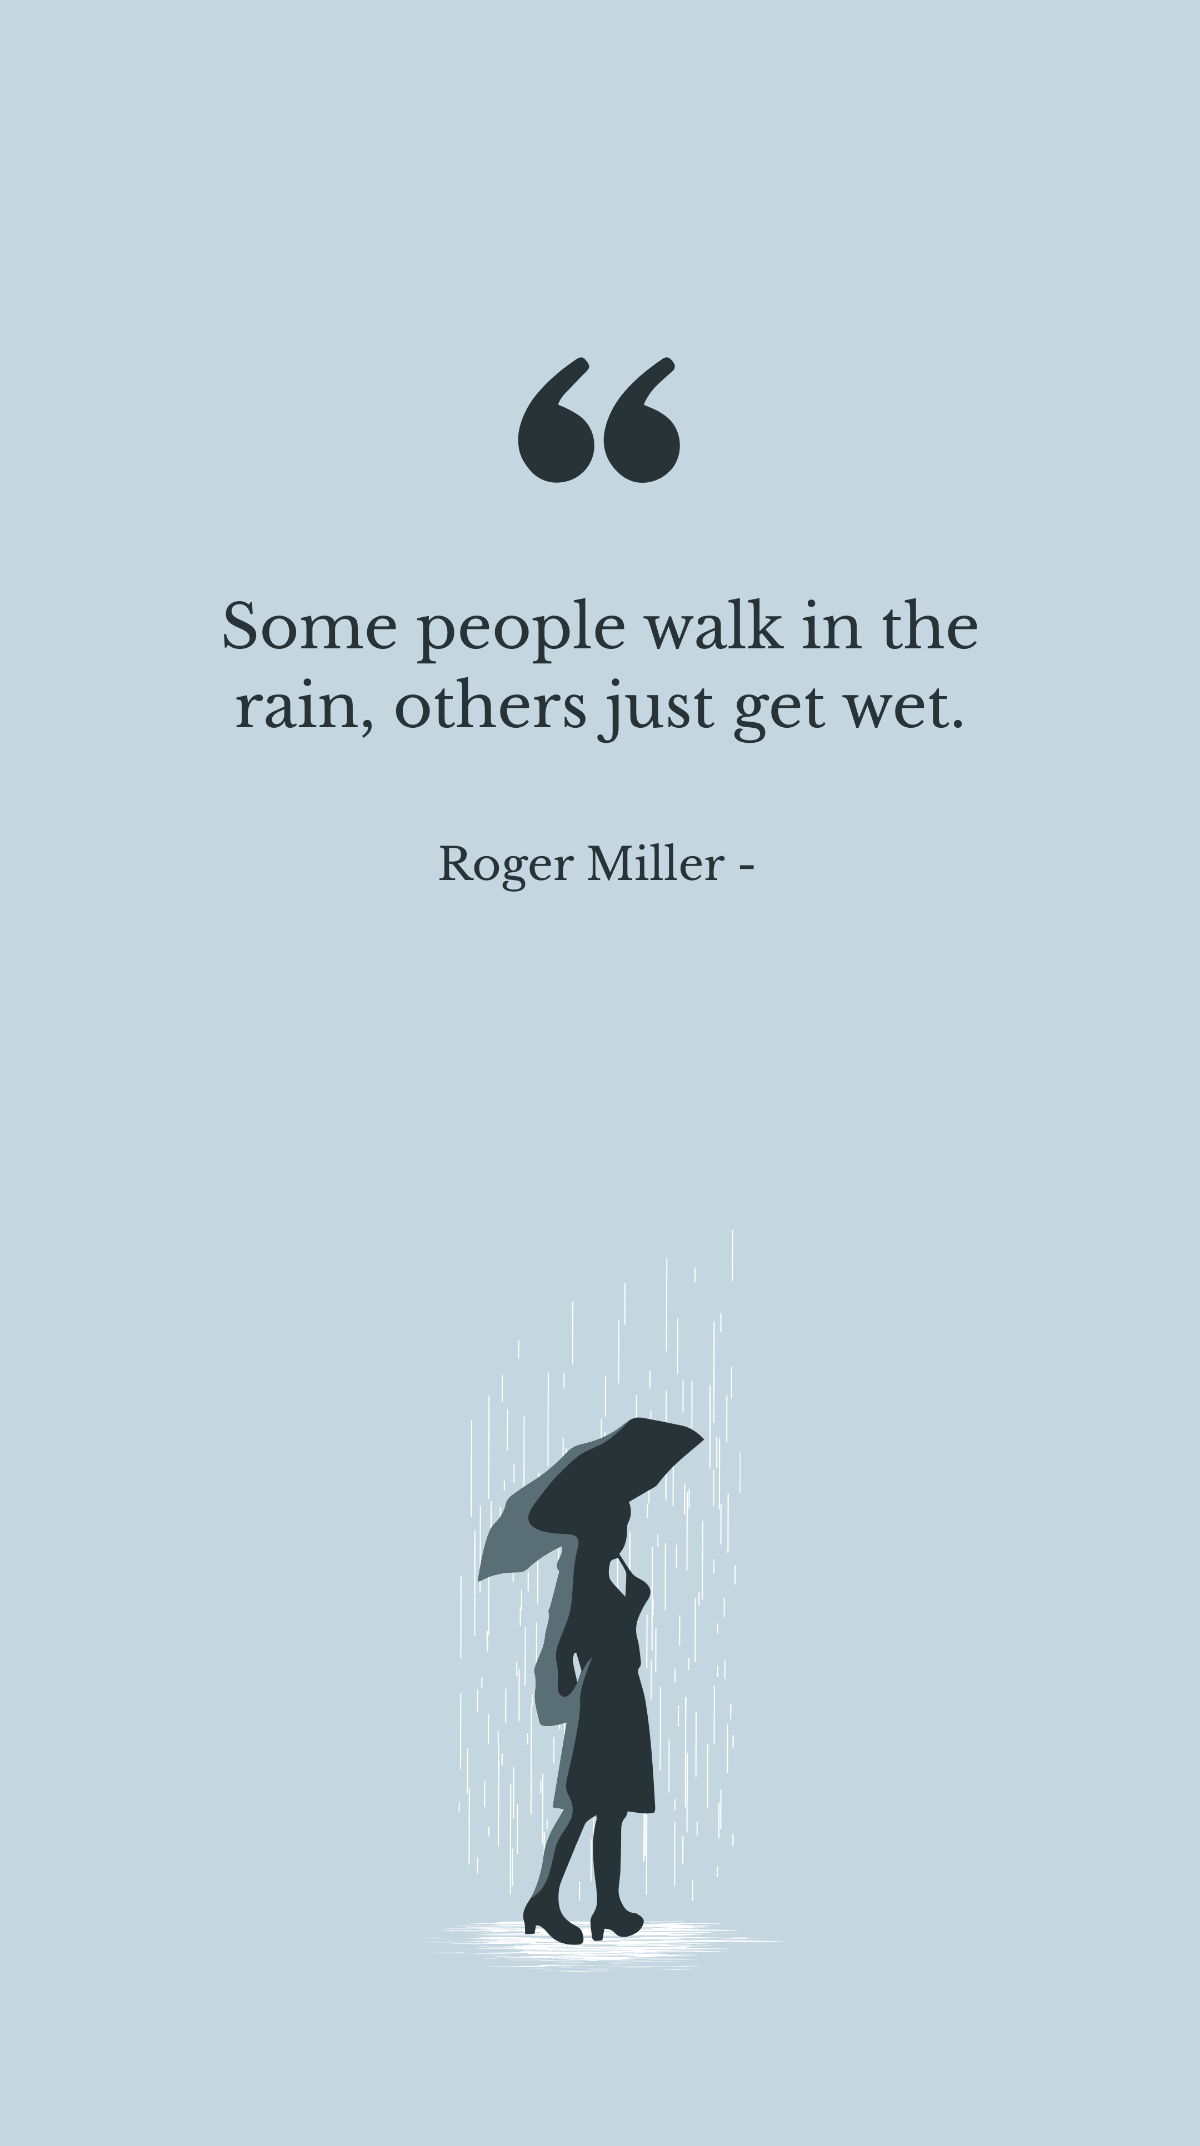 Free Roger Miller - Some people walk in the rain, others just get wet. Template